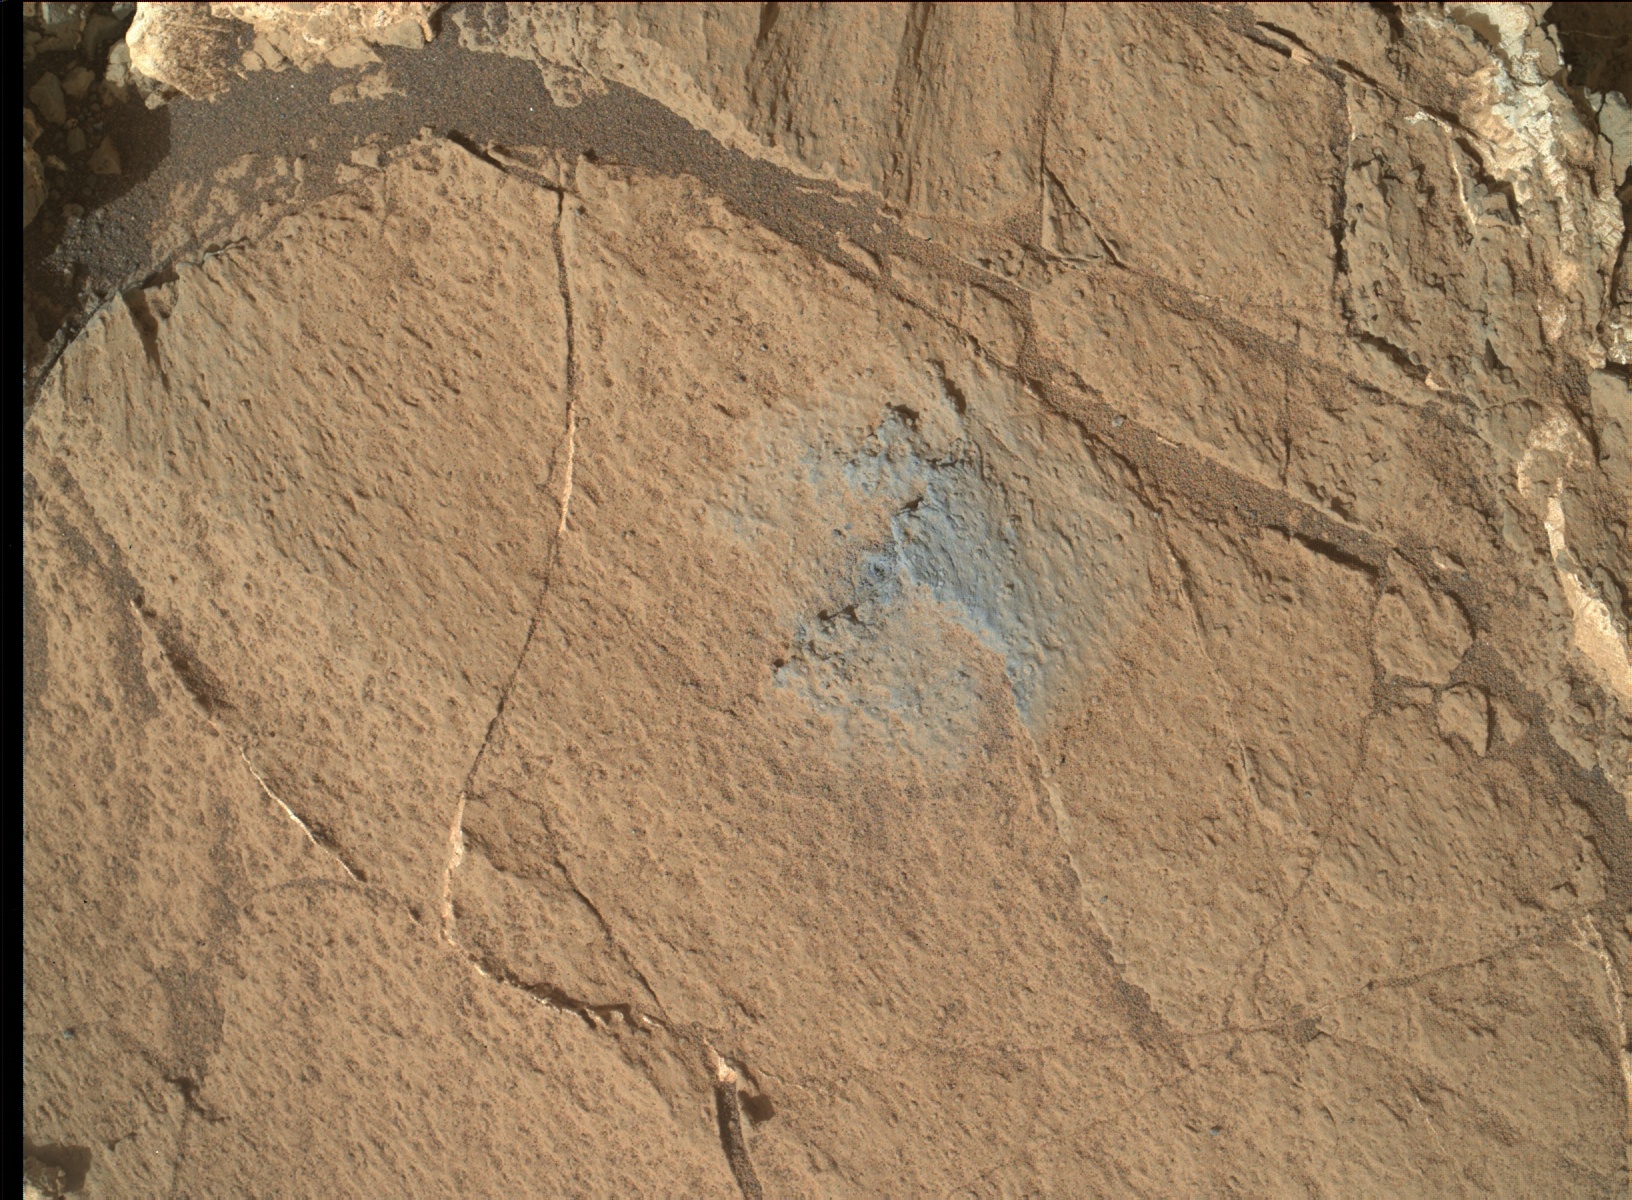 Nasa's Mars rover Curiosity acquired this image using its Mars Hand Lens Imager (MAHLI) on Sol 936